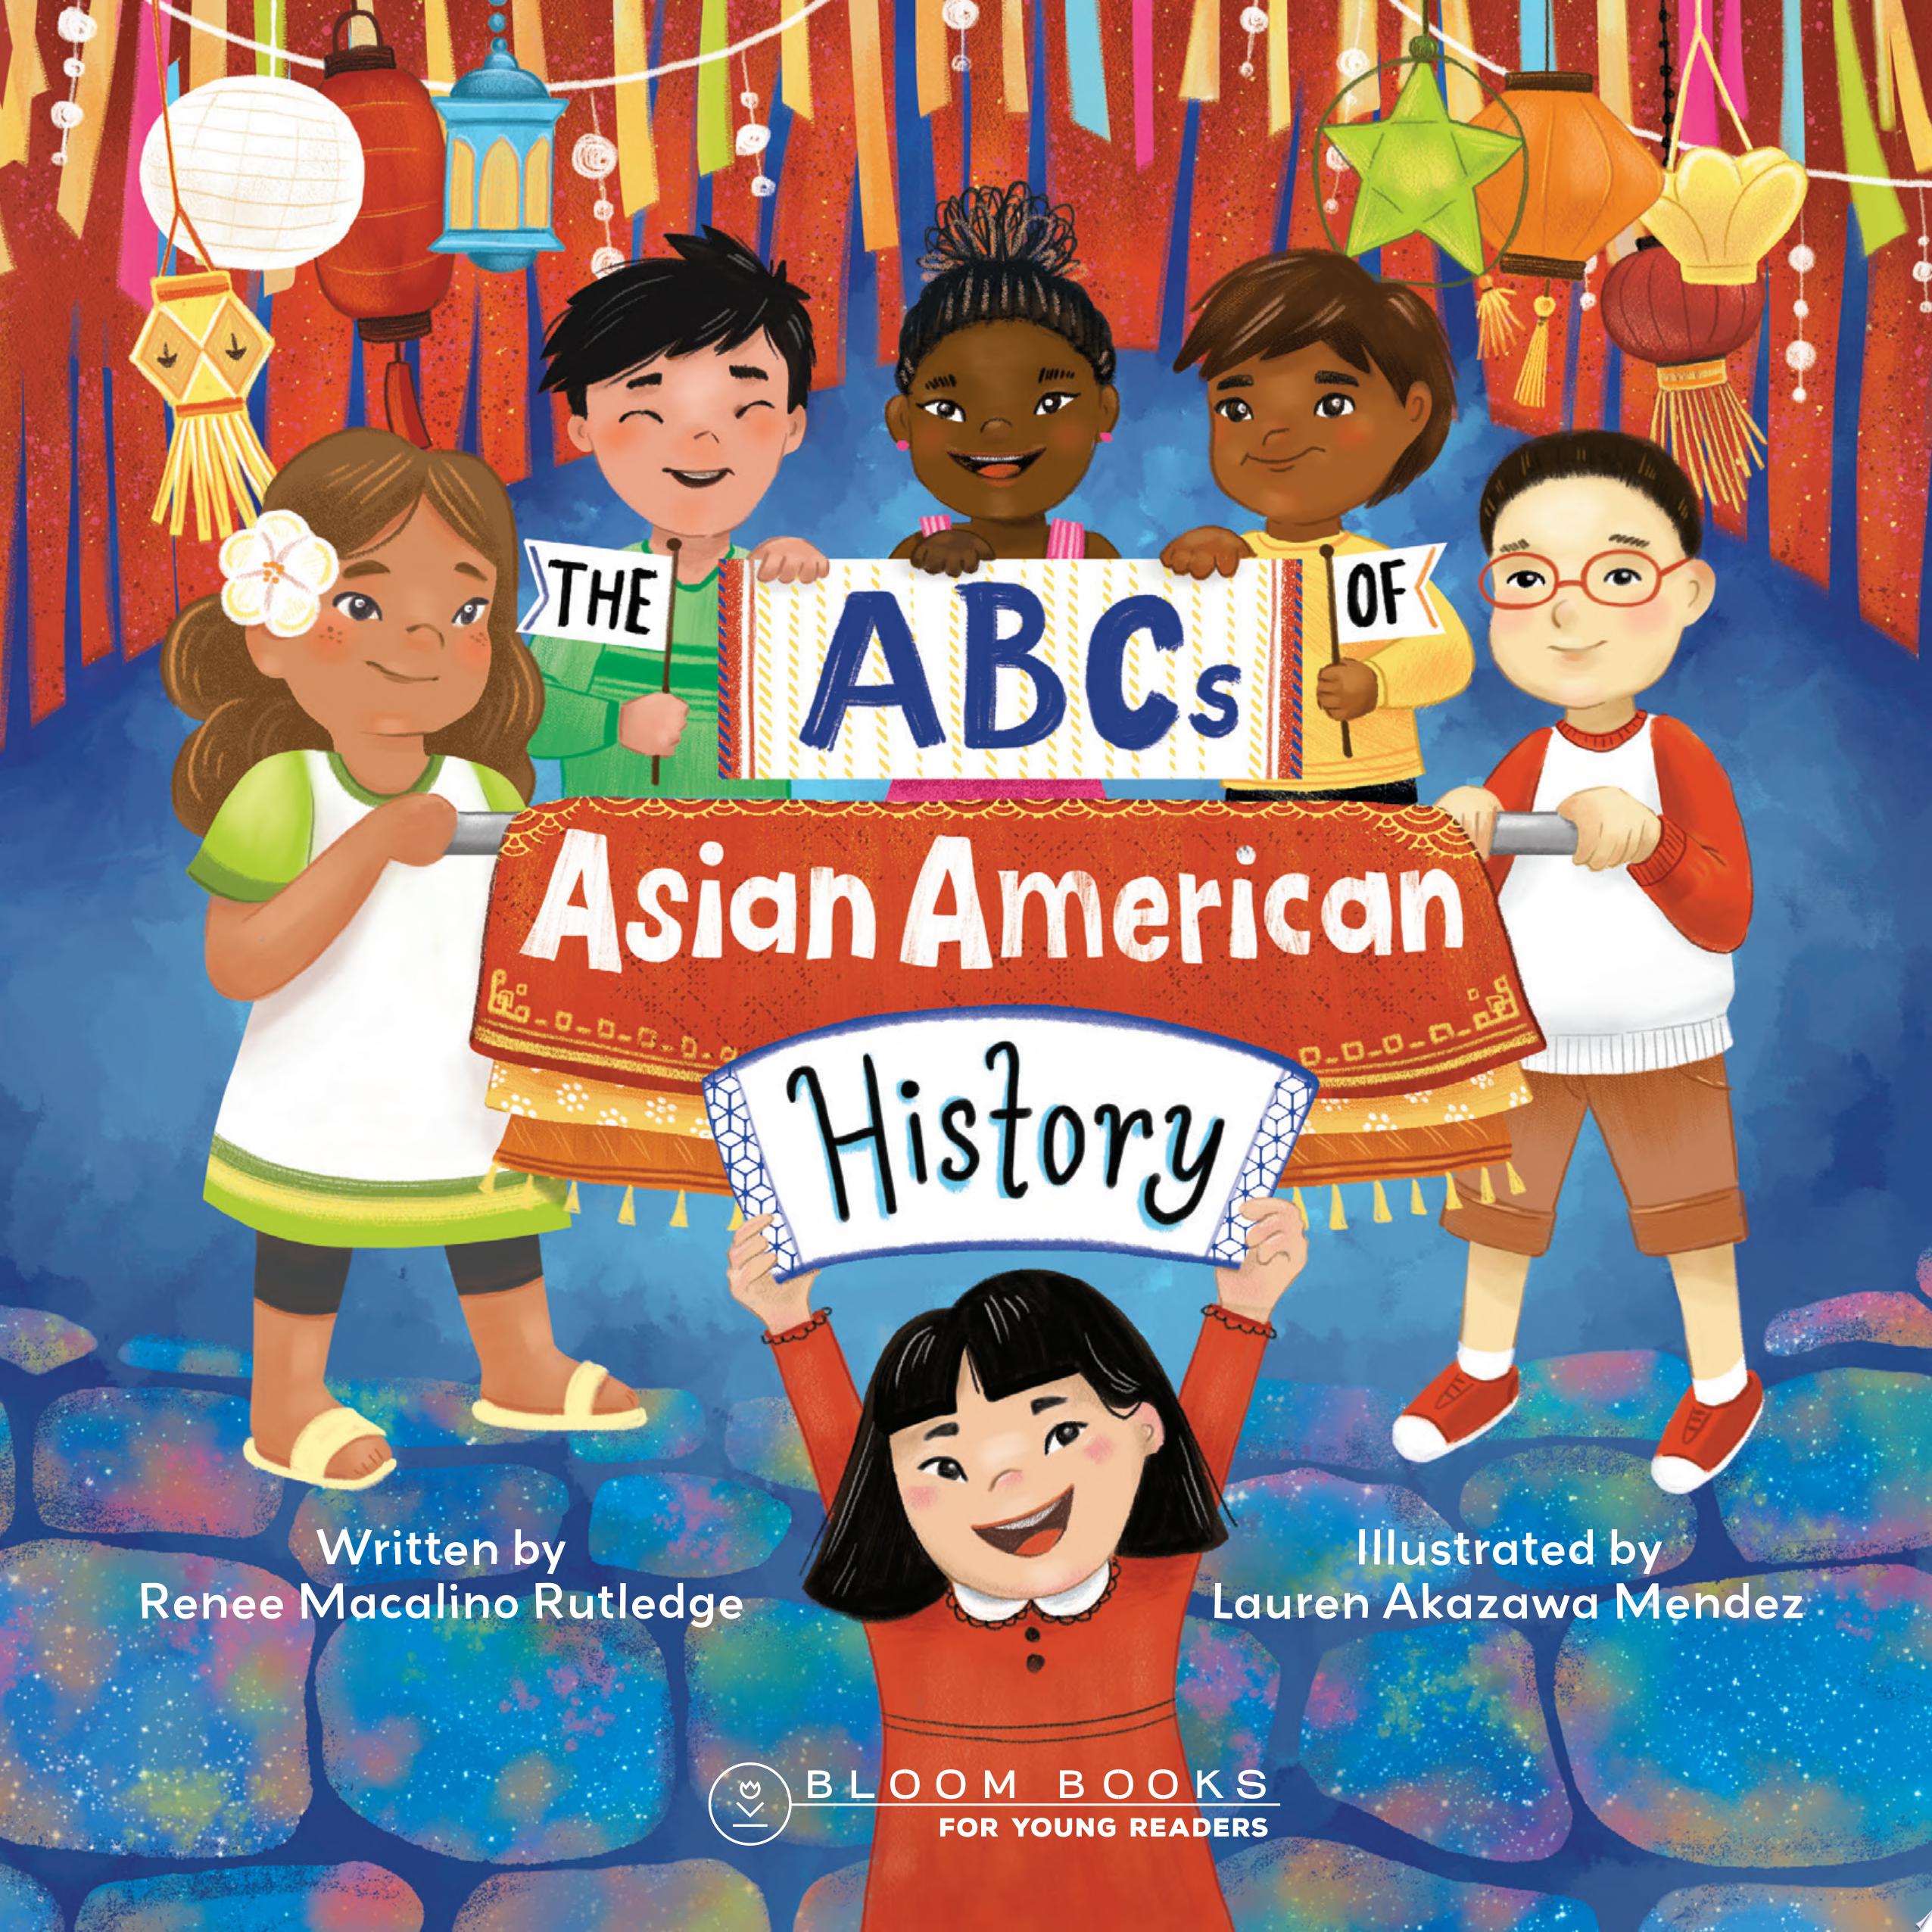 Image for "The ABCs of Asian American History"